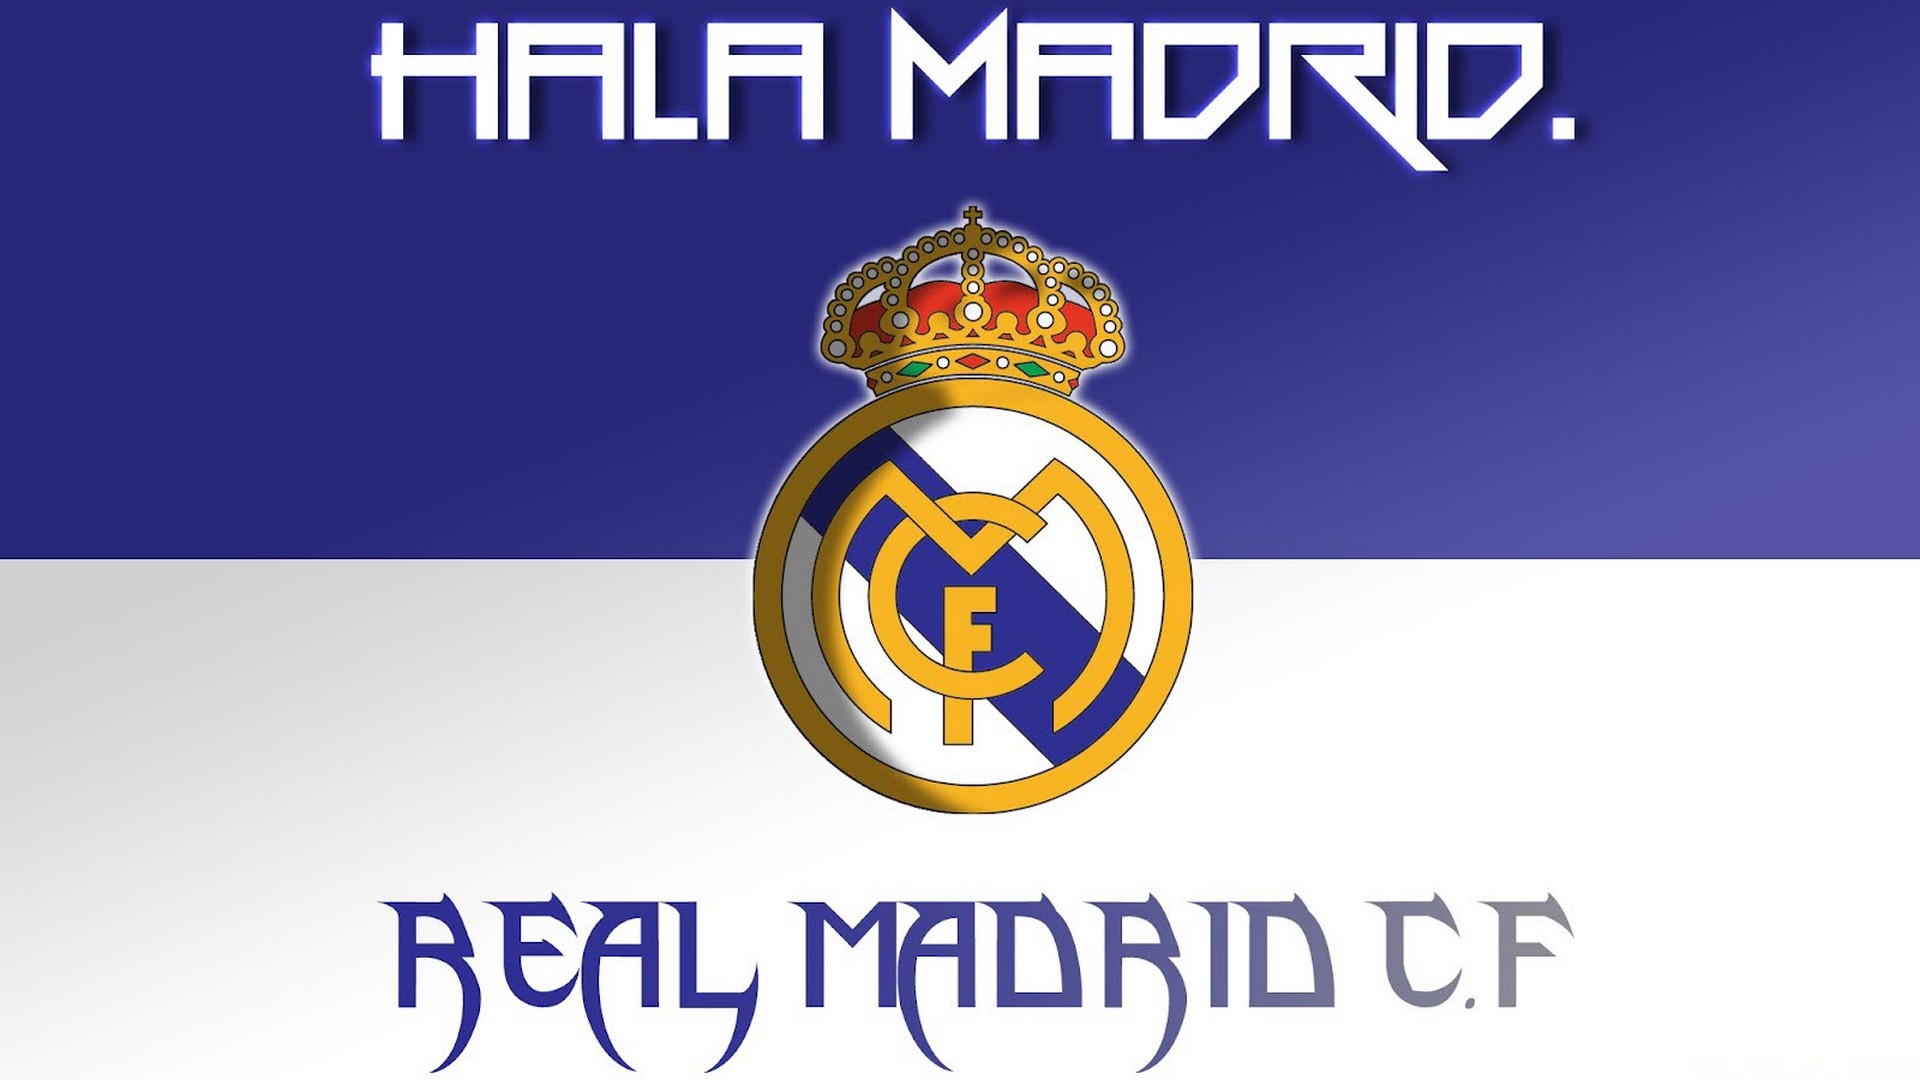 Windows Wallpaper Real Madrid With Resolution 1920X1080 pixel. You can make this wallpaper for your Mac or Windows Desktop Background, iPhone, Android or Tablet and another Smartphone device for free